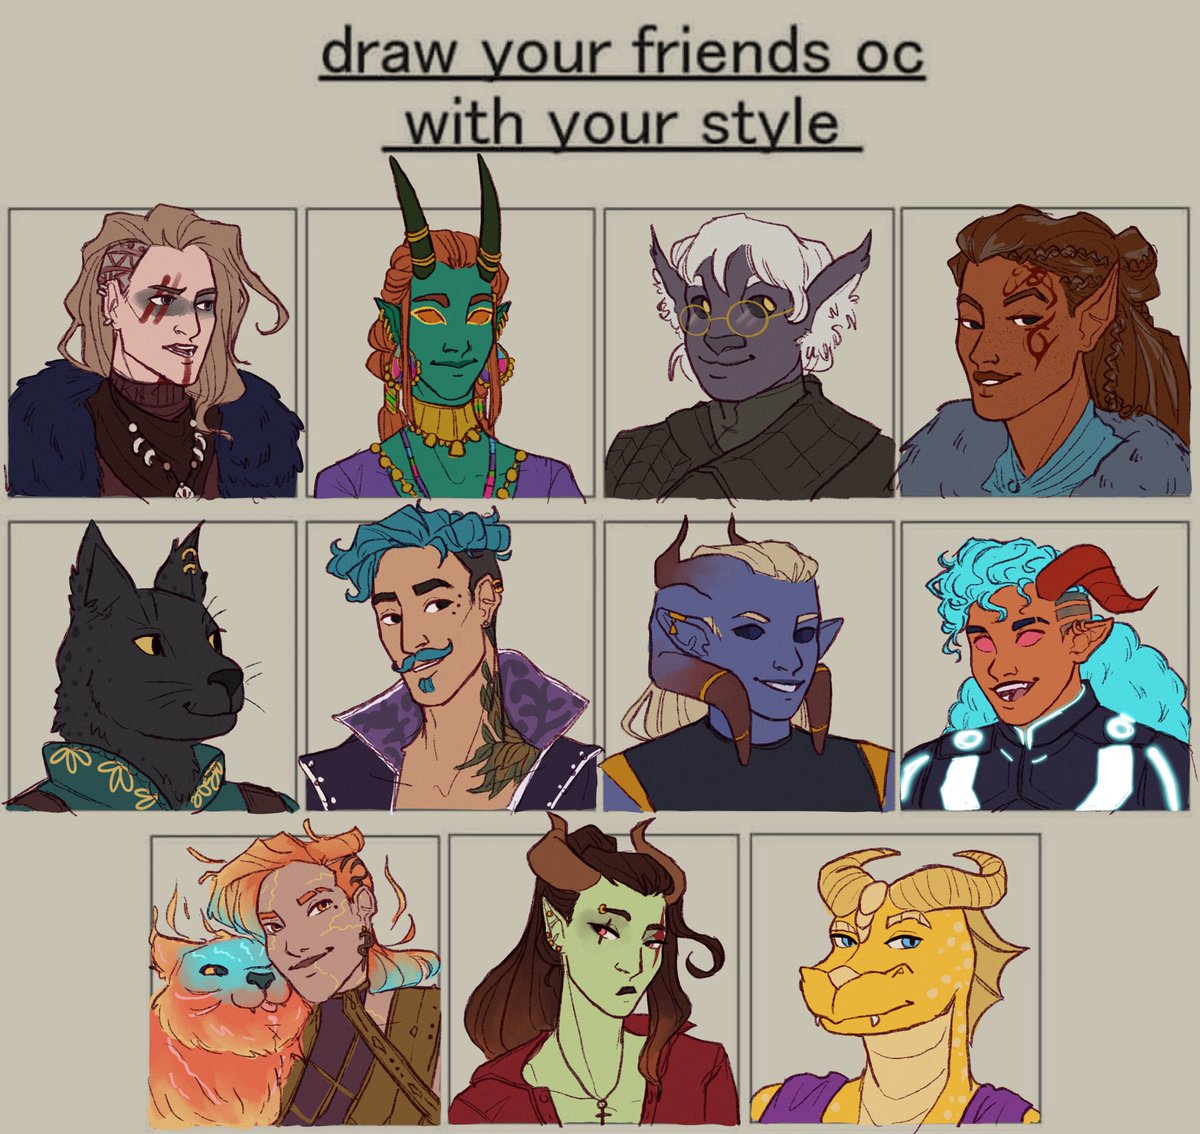 What a colorful lil mix of OCs 